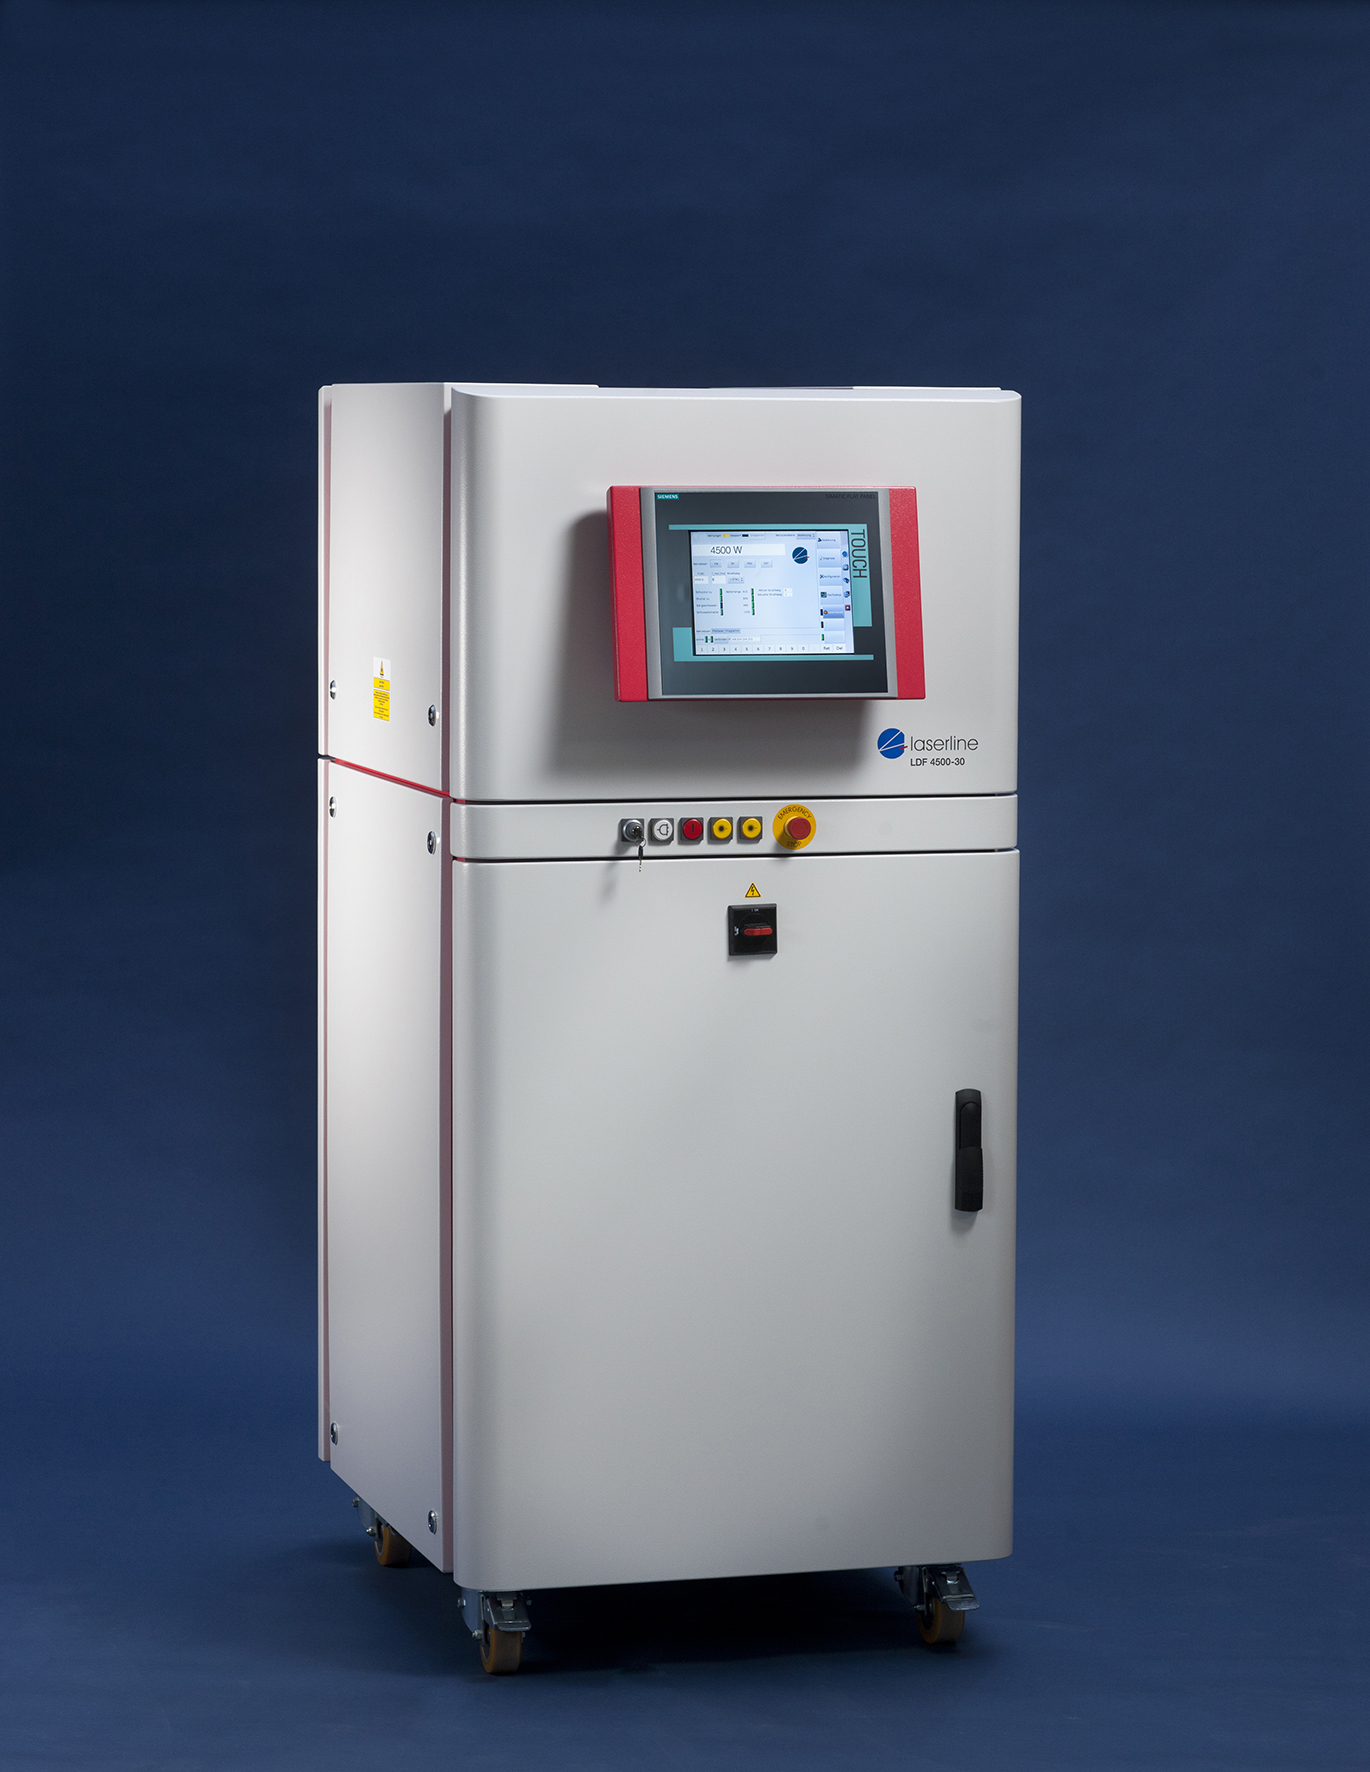 High power diode laser LDF 4500-30 for wire build-up welding processes